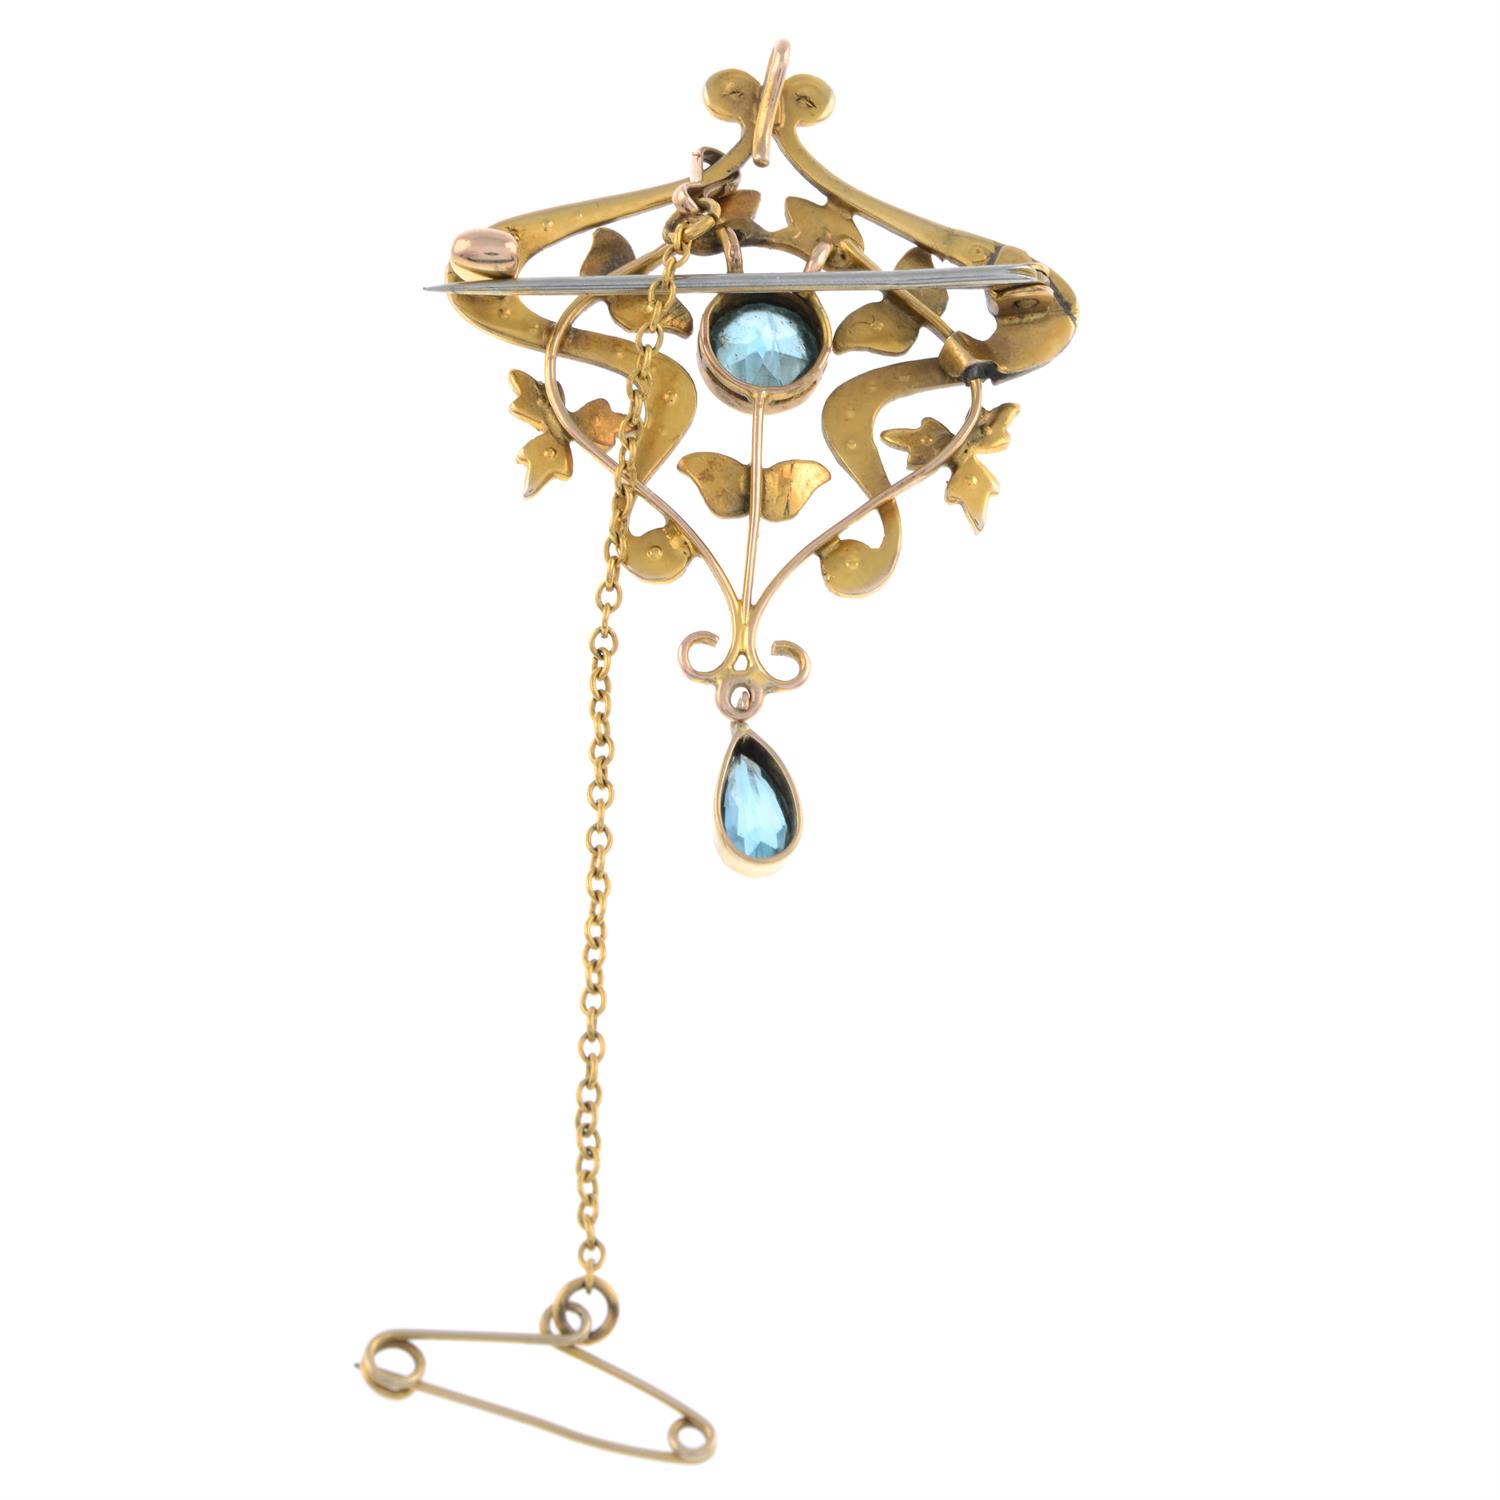 Early 20th 9ct gold zircon & seed pearl brooch - Image 2 of 2